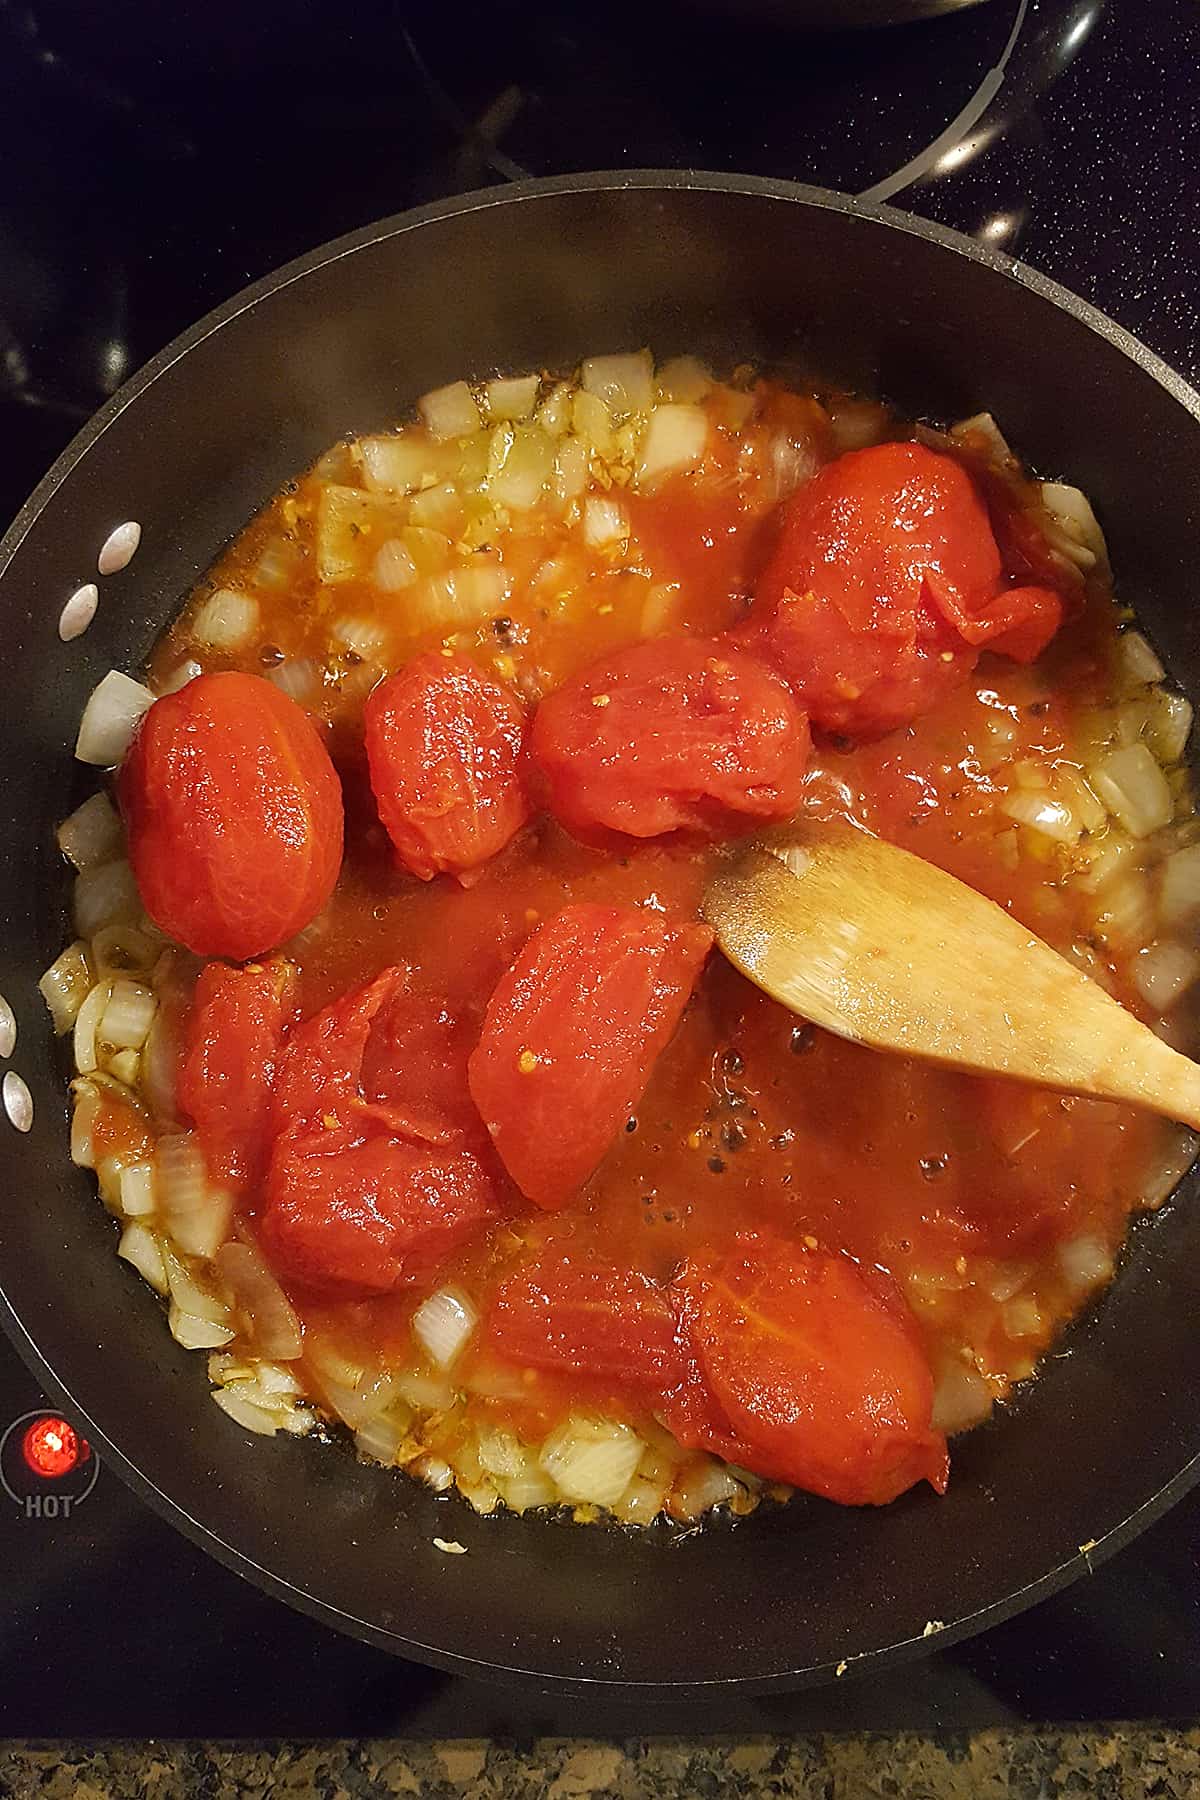 Tomatoes added to cooked garlic and onion in saute pan.